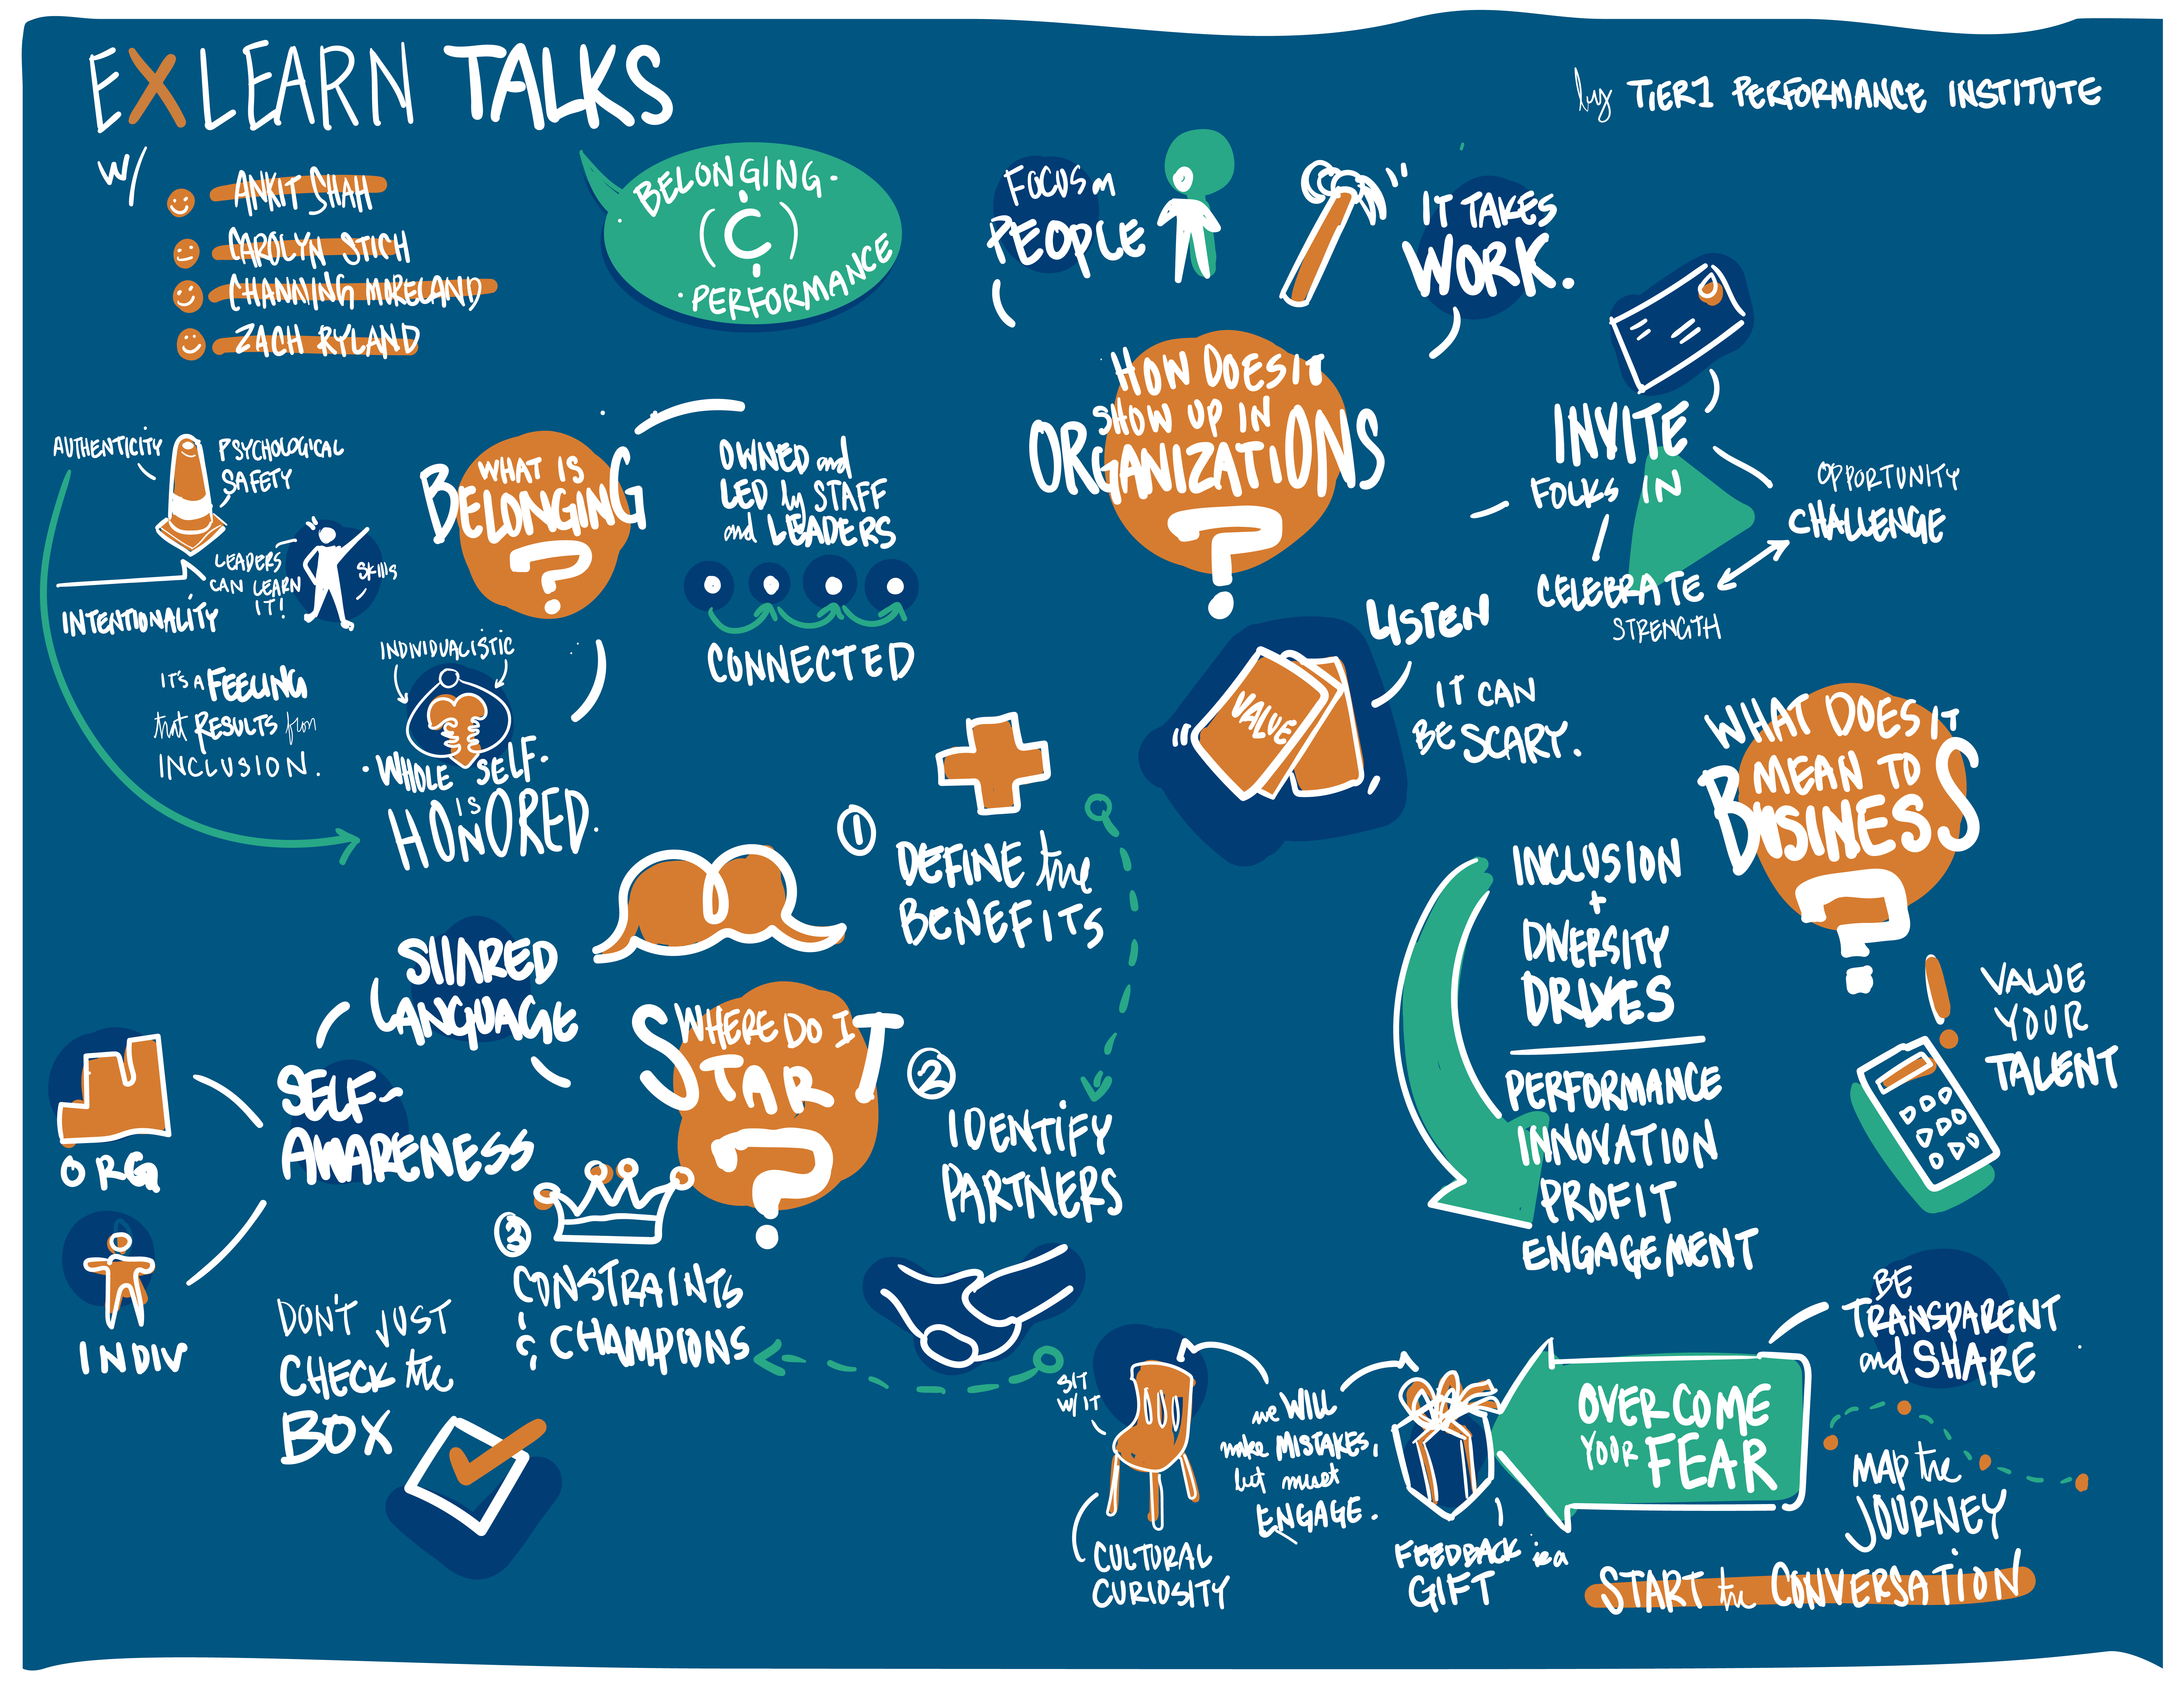 Visual capture from webinar on creating a culture of belonging